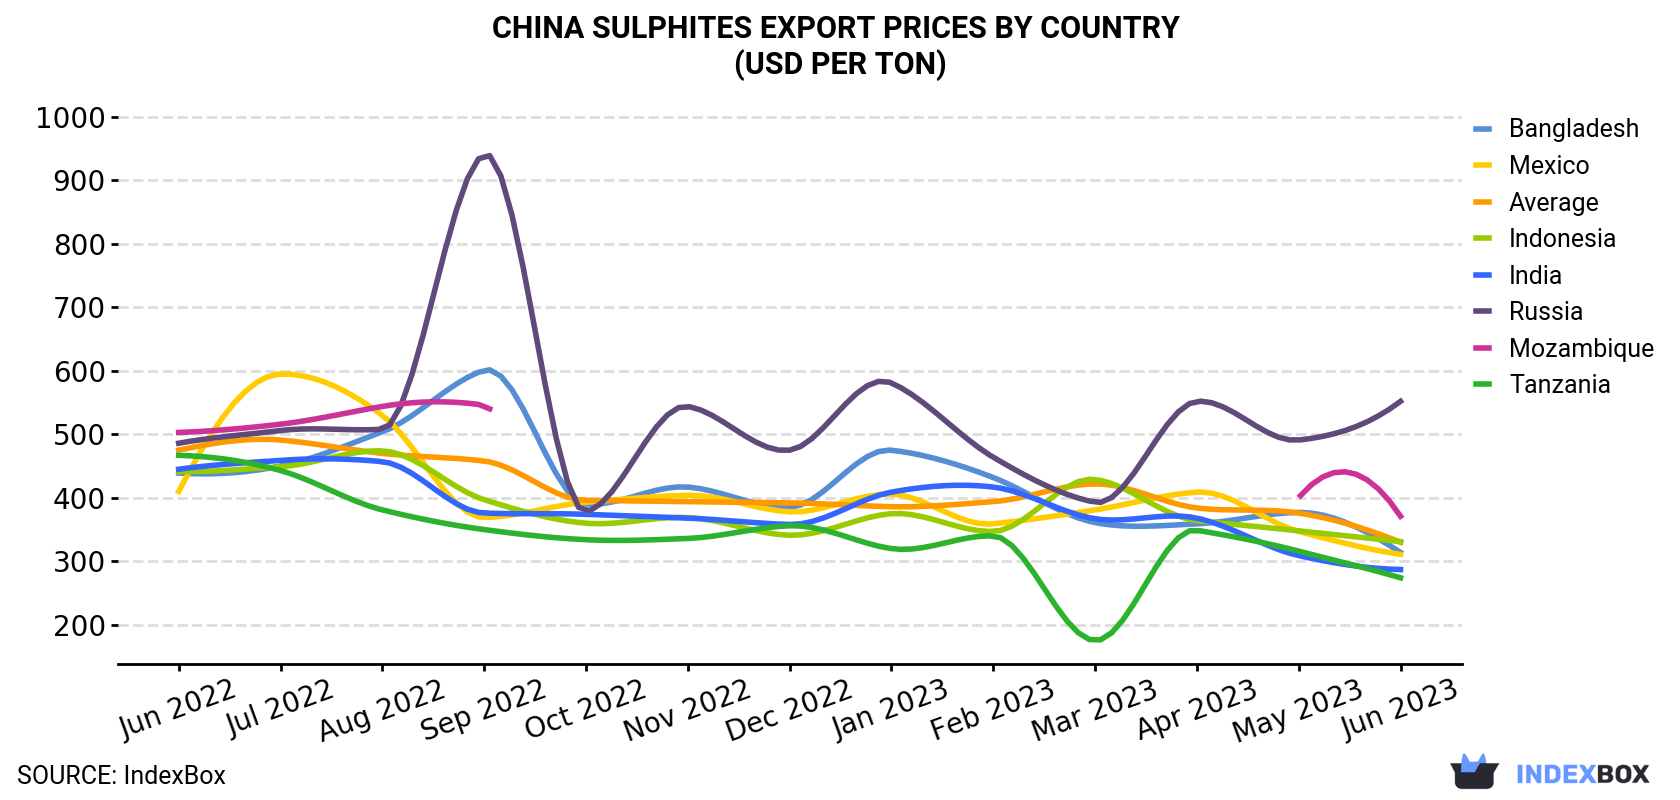 China Sulphites Export Prices By Country (USD Per Ton)